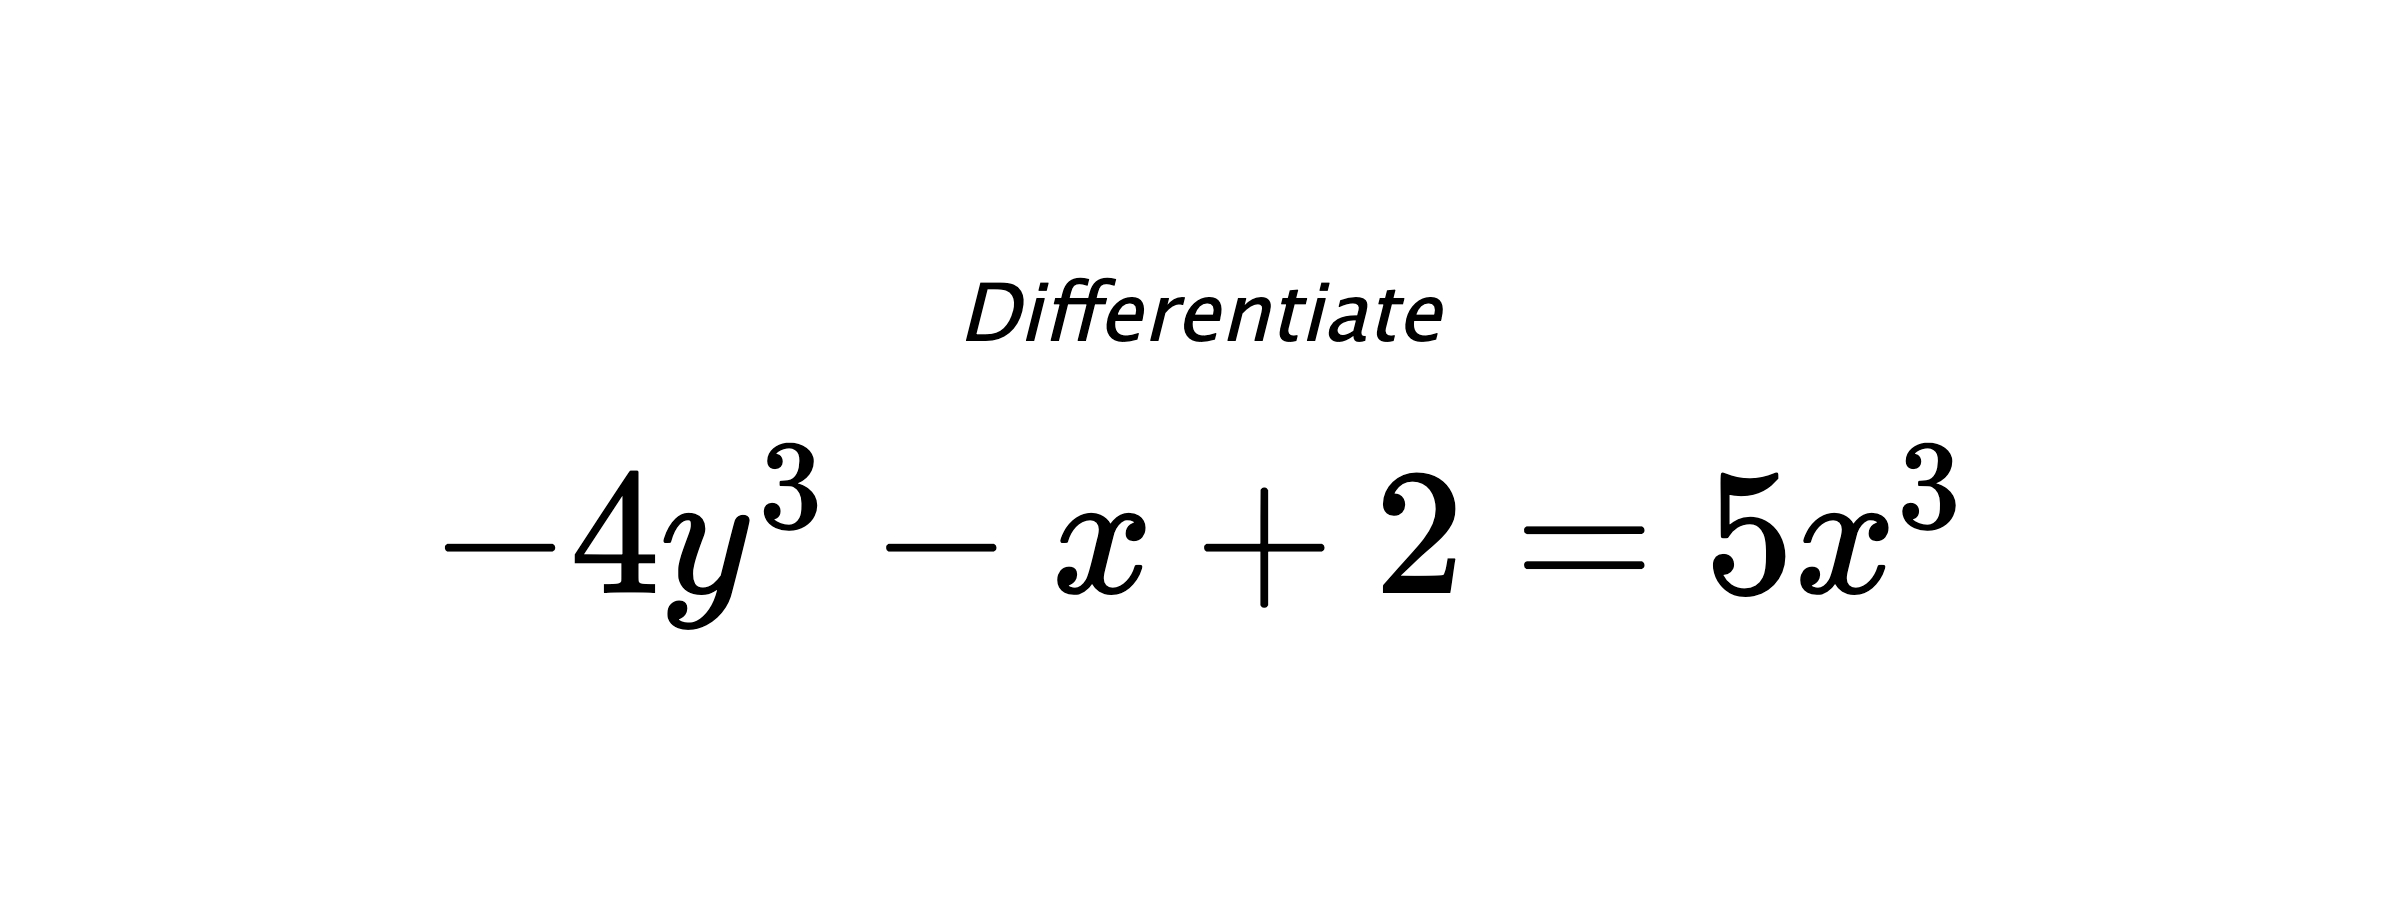 Differentiate $ -4y^3-x+2 = 5x^3 $